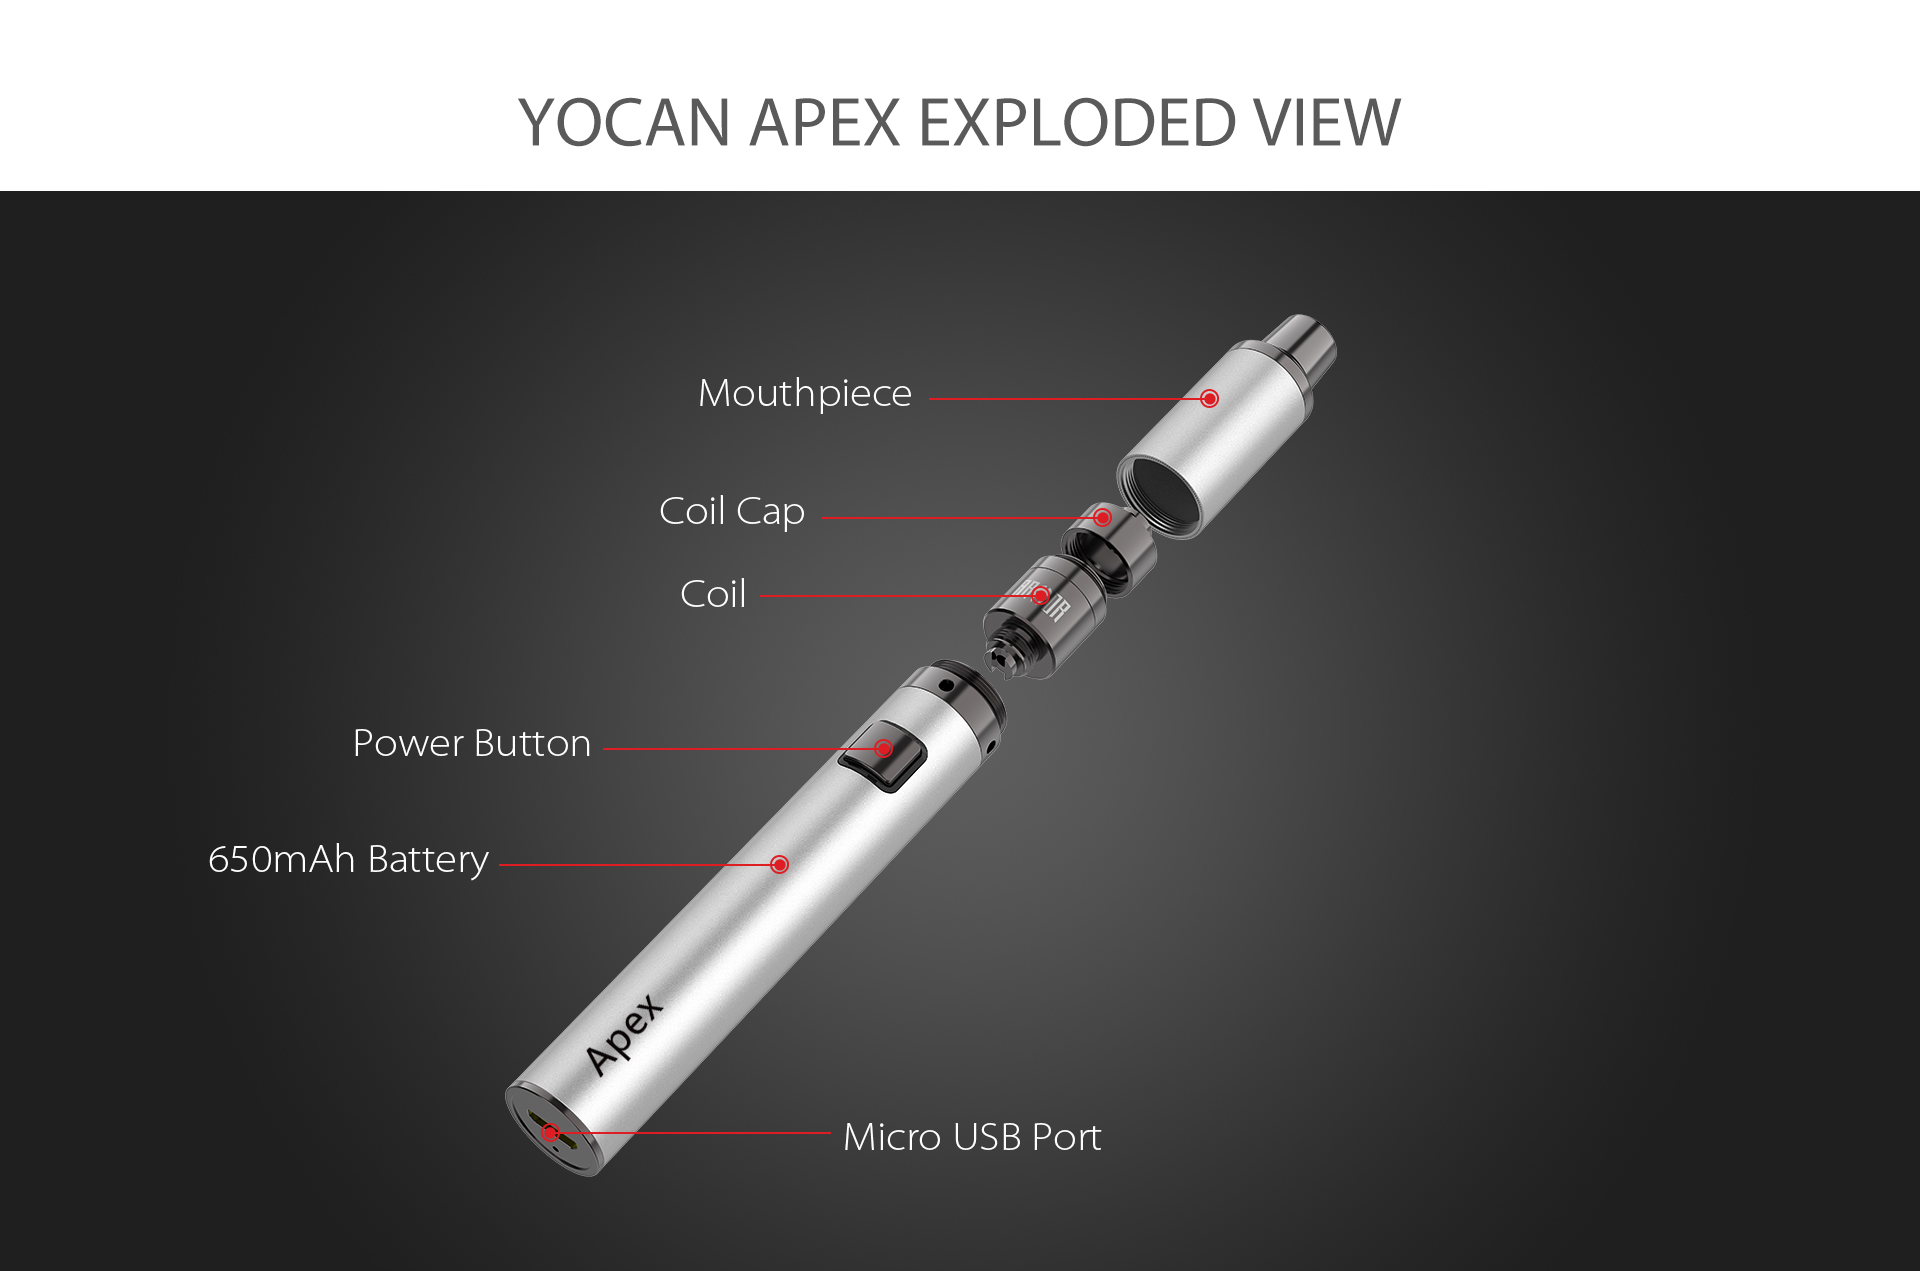 Yocan Apex concentrate vaporizer pen exploded view.